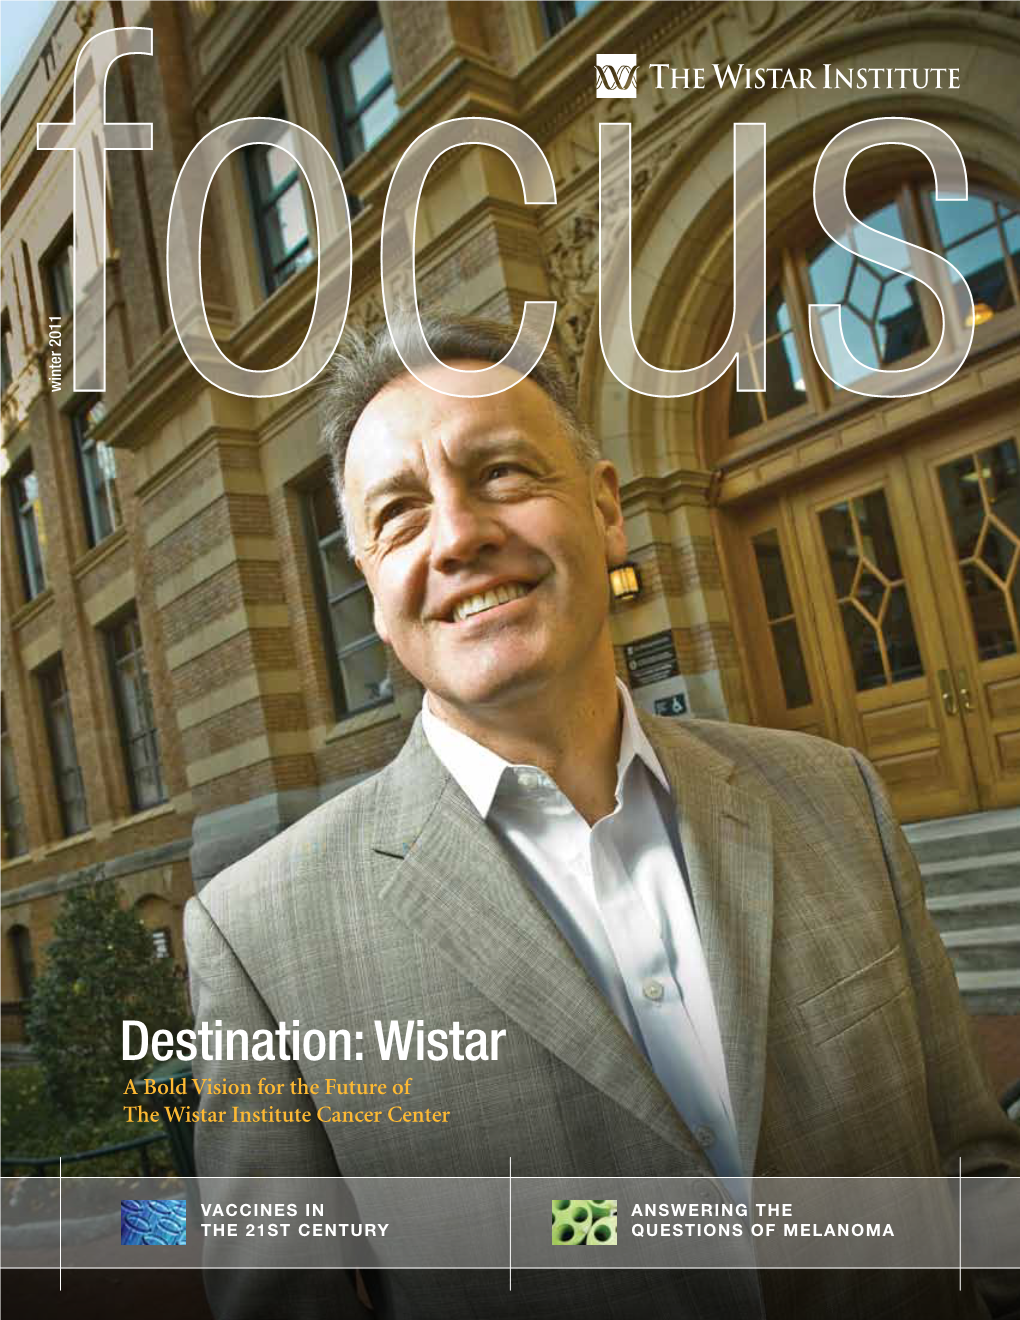 Destination: Wistar a Bold Vision for the Future of the Wistar Institute Cancer Center